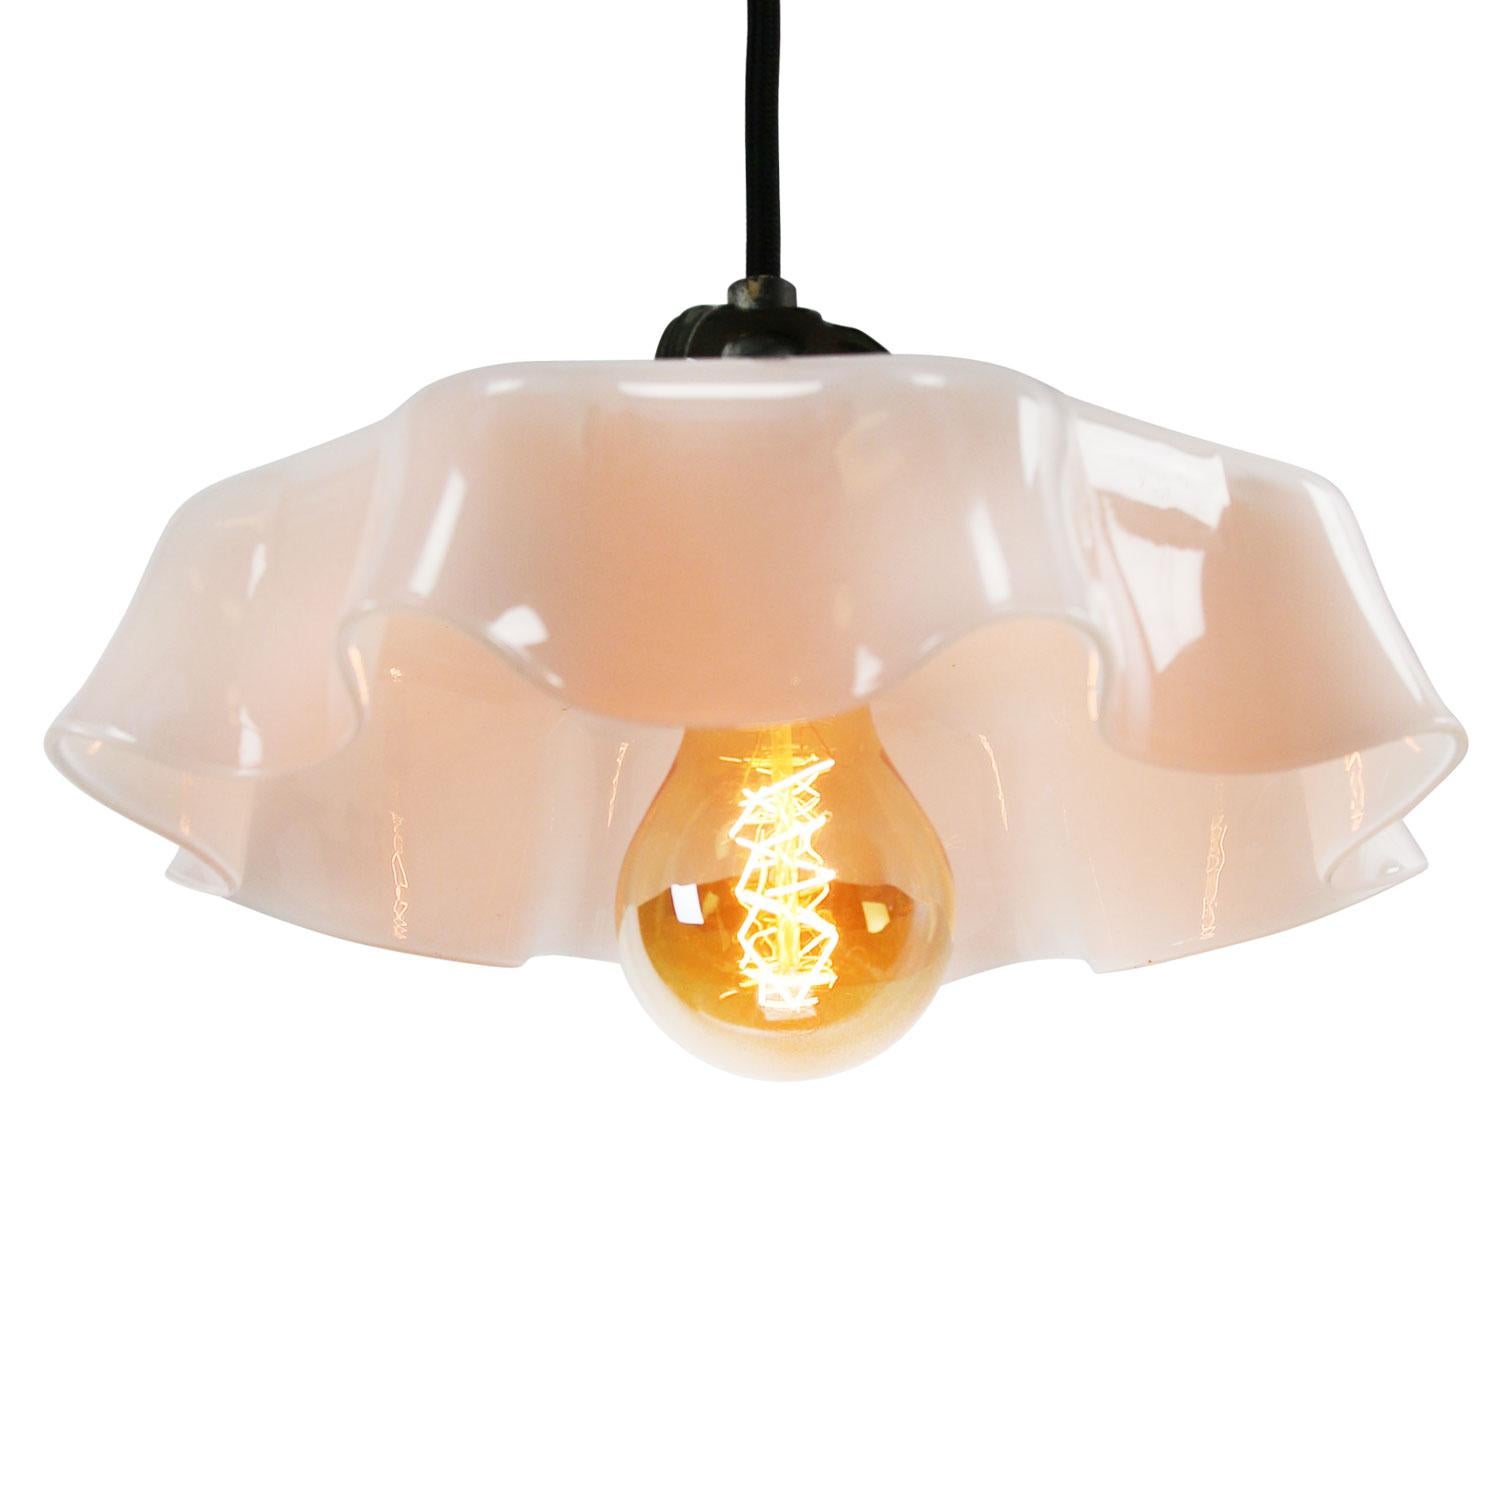 French opaline glass industrial pendant.

Weight 1.50 kg / 3.3 lb

Priced per individual item. All lamps have been made suitable by international standards for incandescent light bulbs, energy-efficient and LED bulbs. E26/E27 bulb holders and new